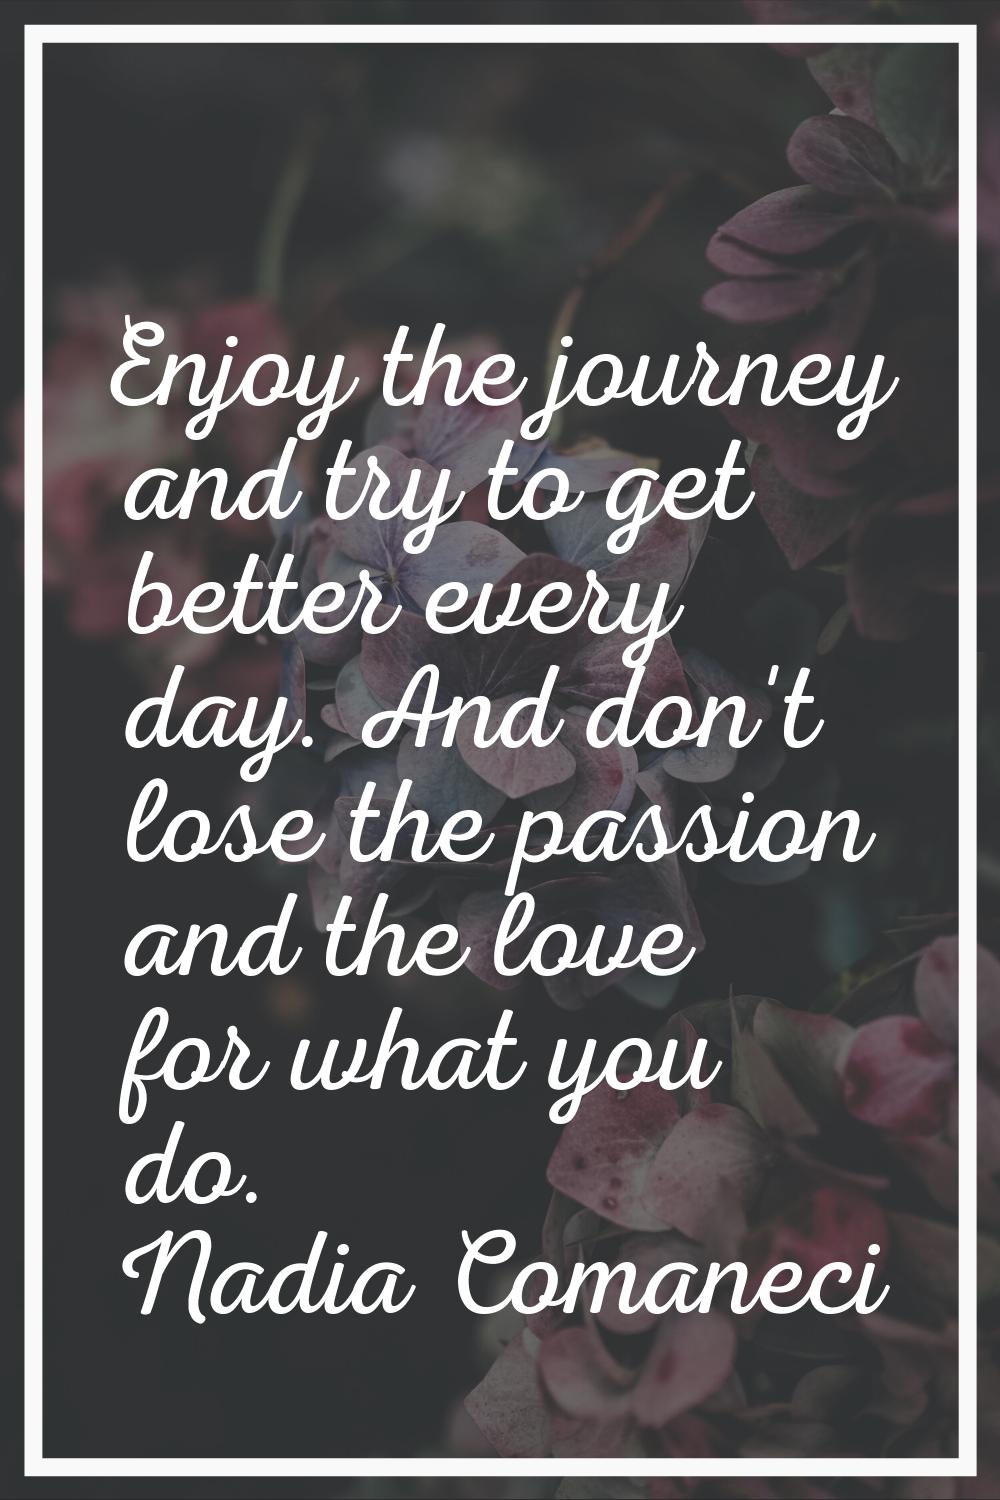 Enjoy the journey and try to get better every day. And don't lose the passion and the love for what